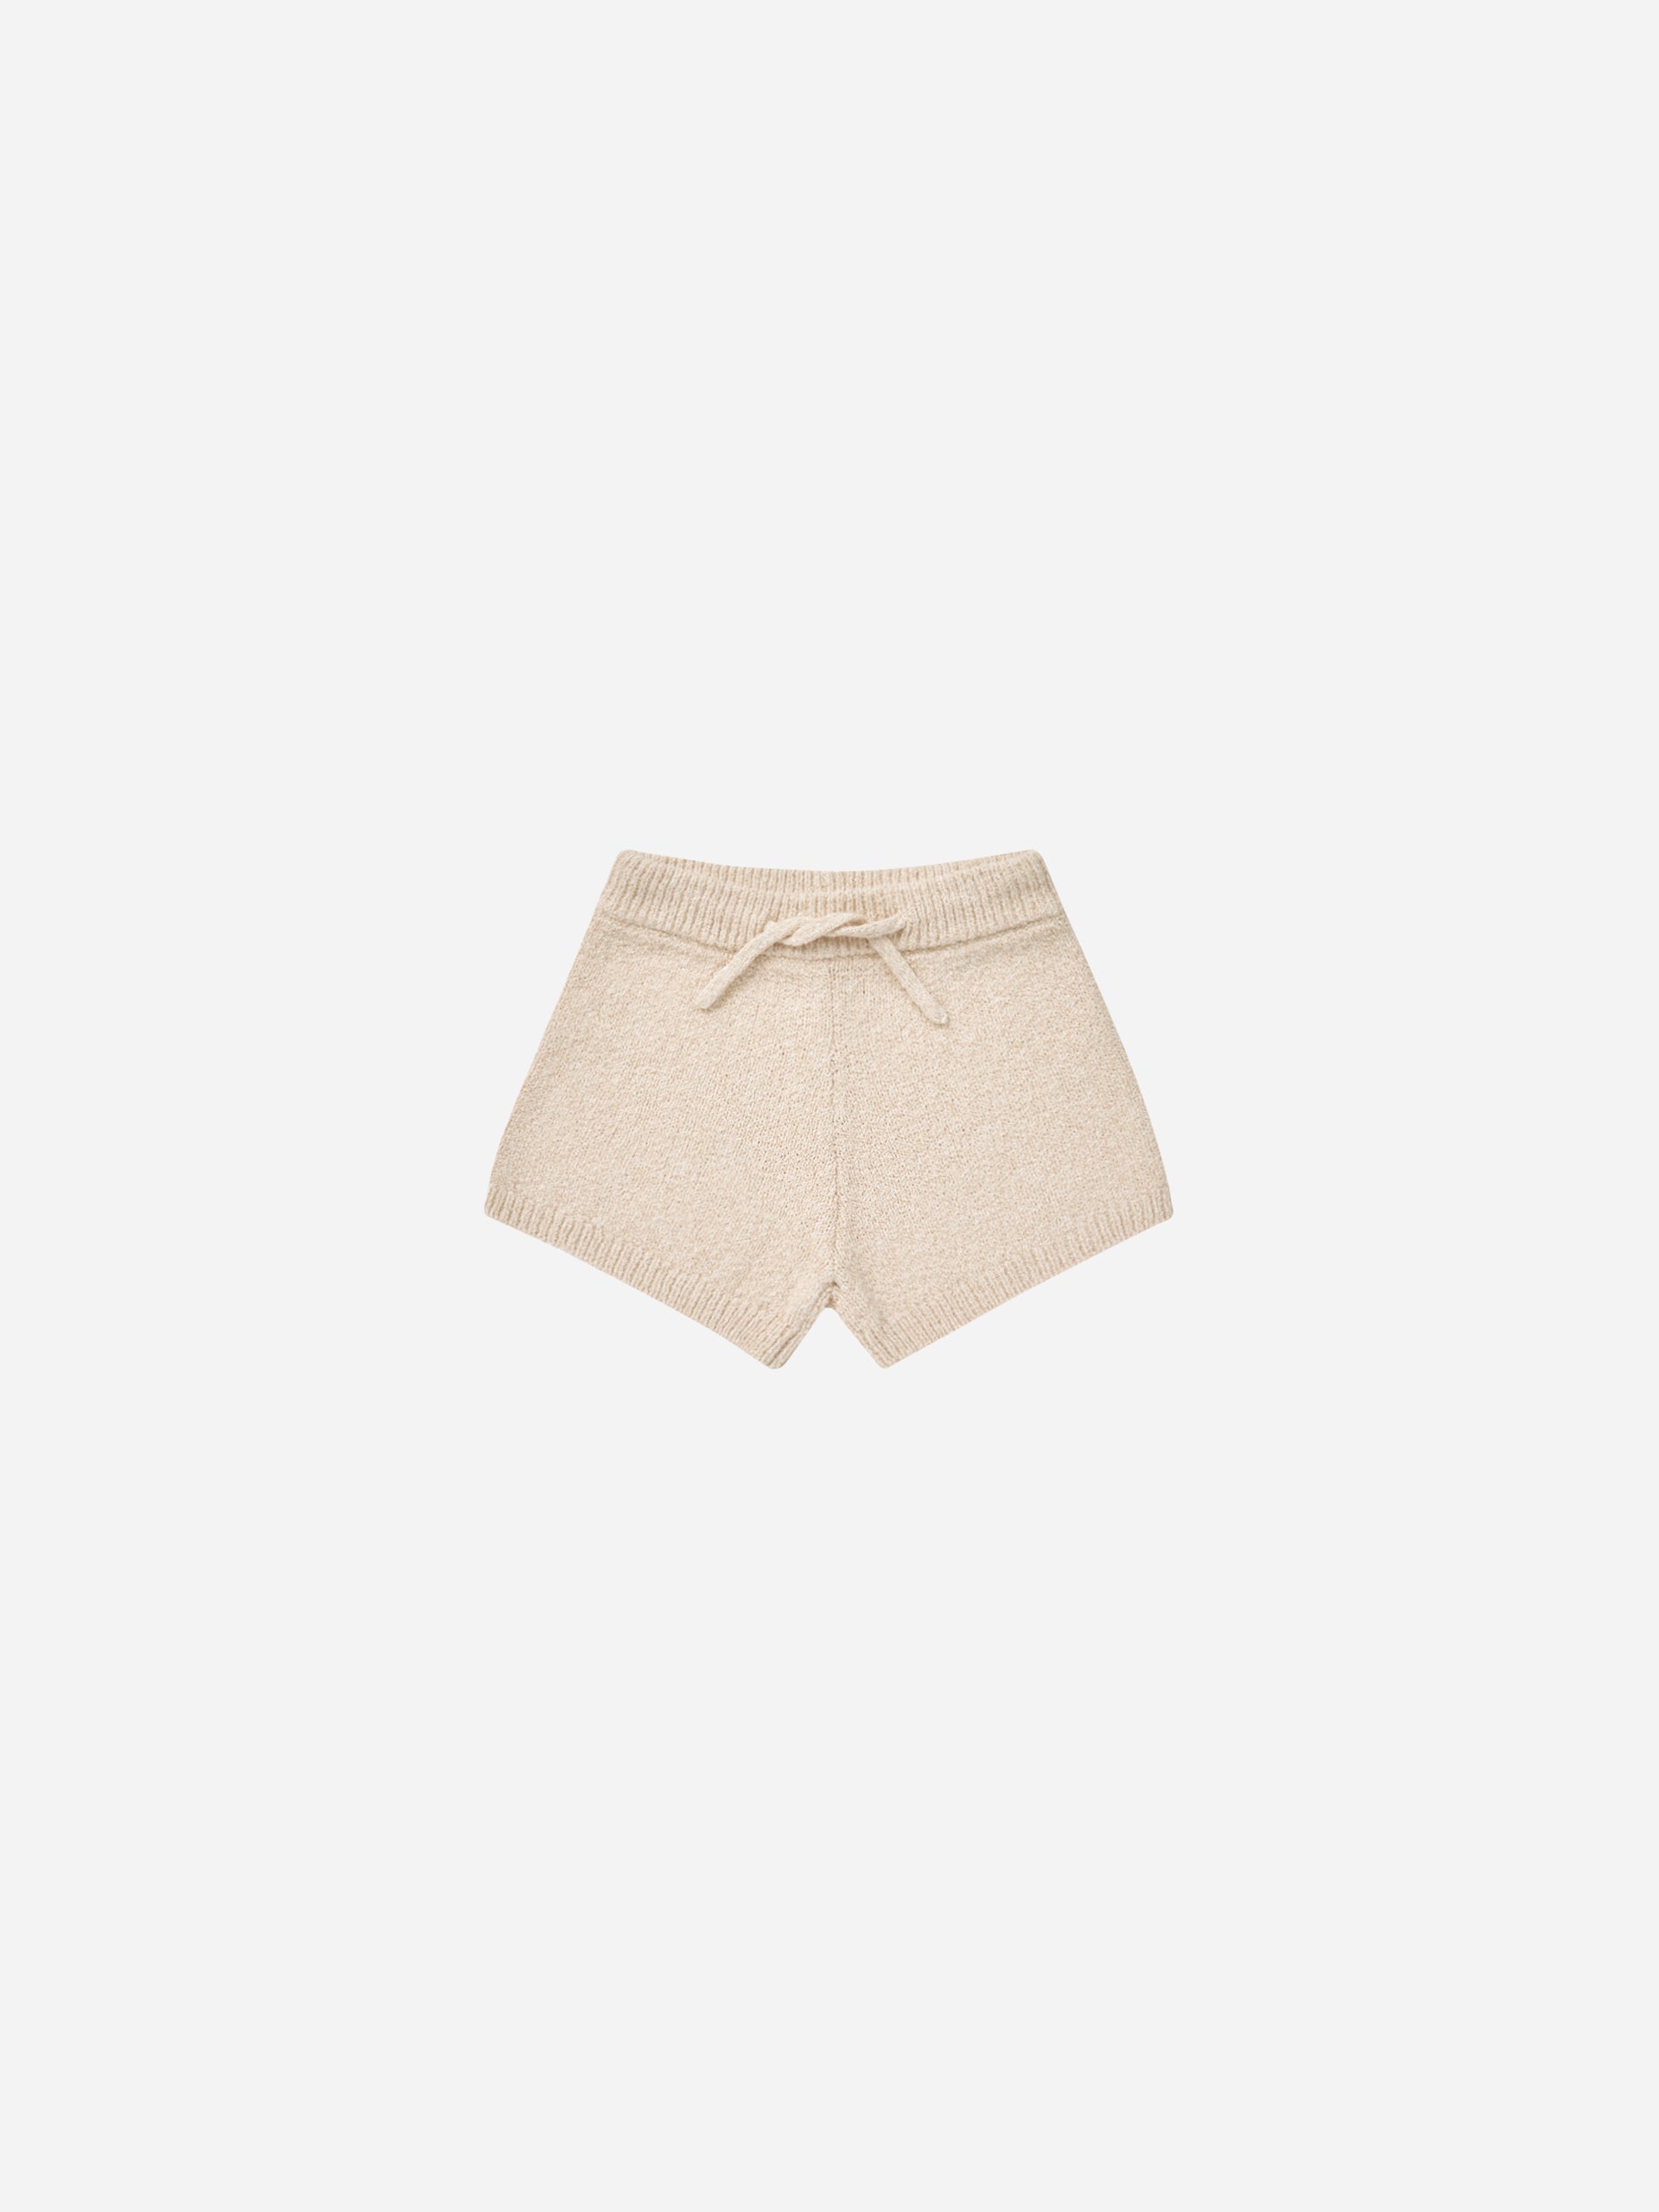 Knit Short || Heathered Oat - Rylee + Cru | Kids Clothes | Trendy Baby Clothes | Modern Infant Outfits |